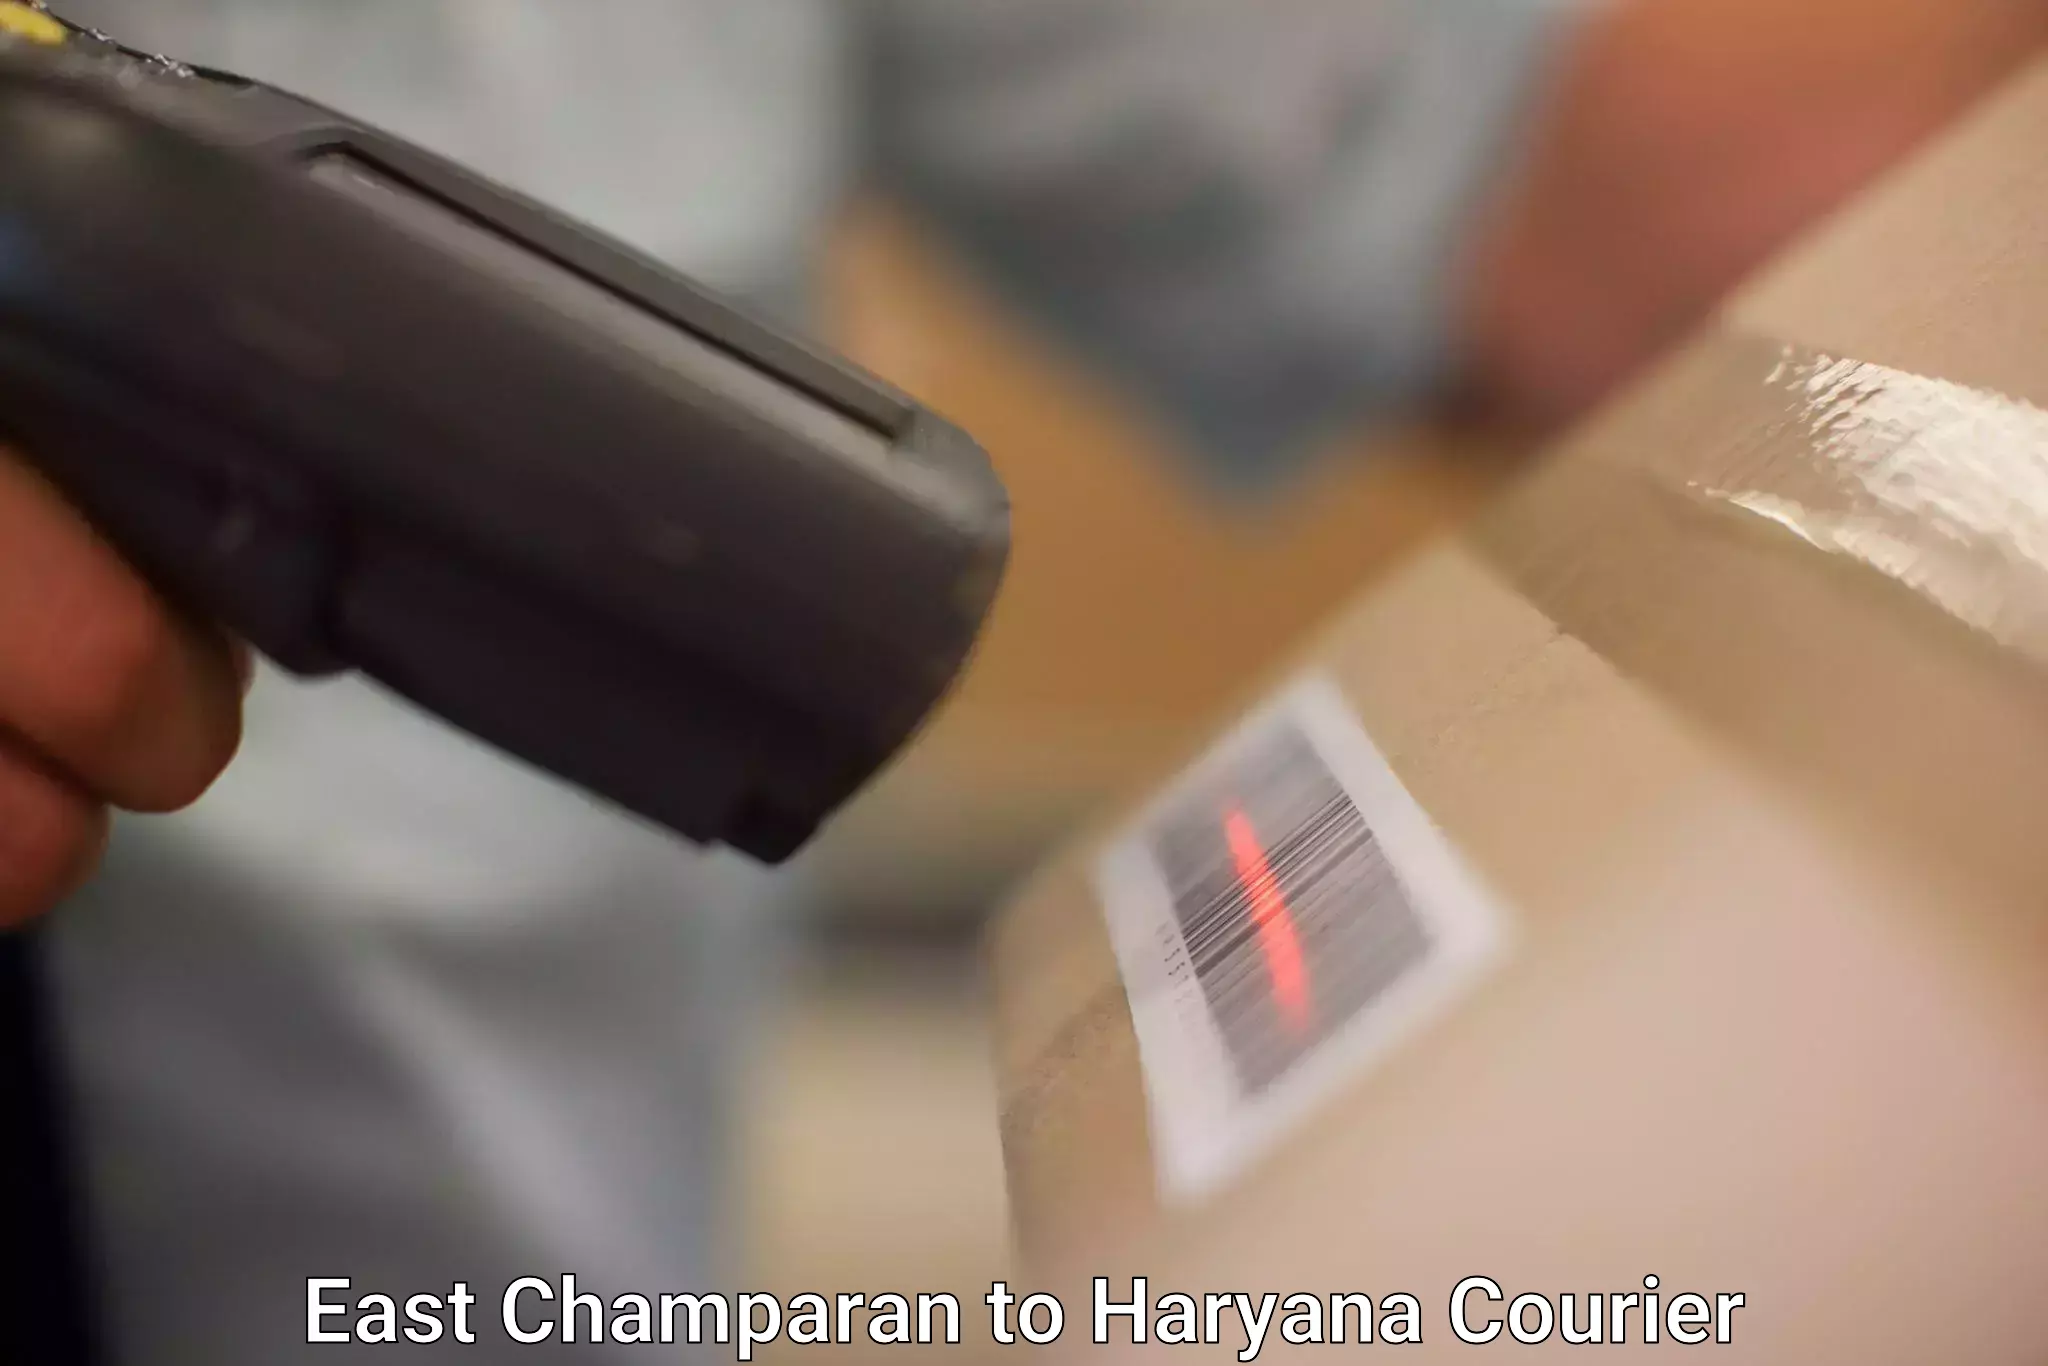 Professional courier handling East Champaran to Bilaspur Haryana